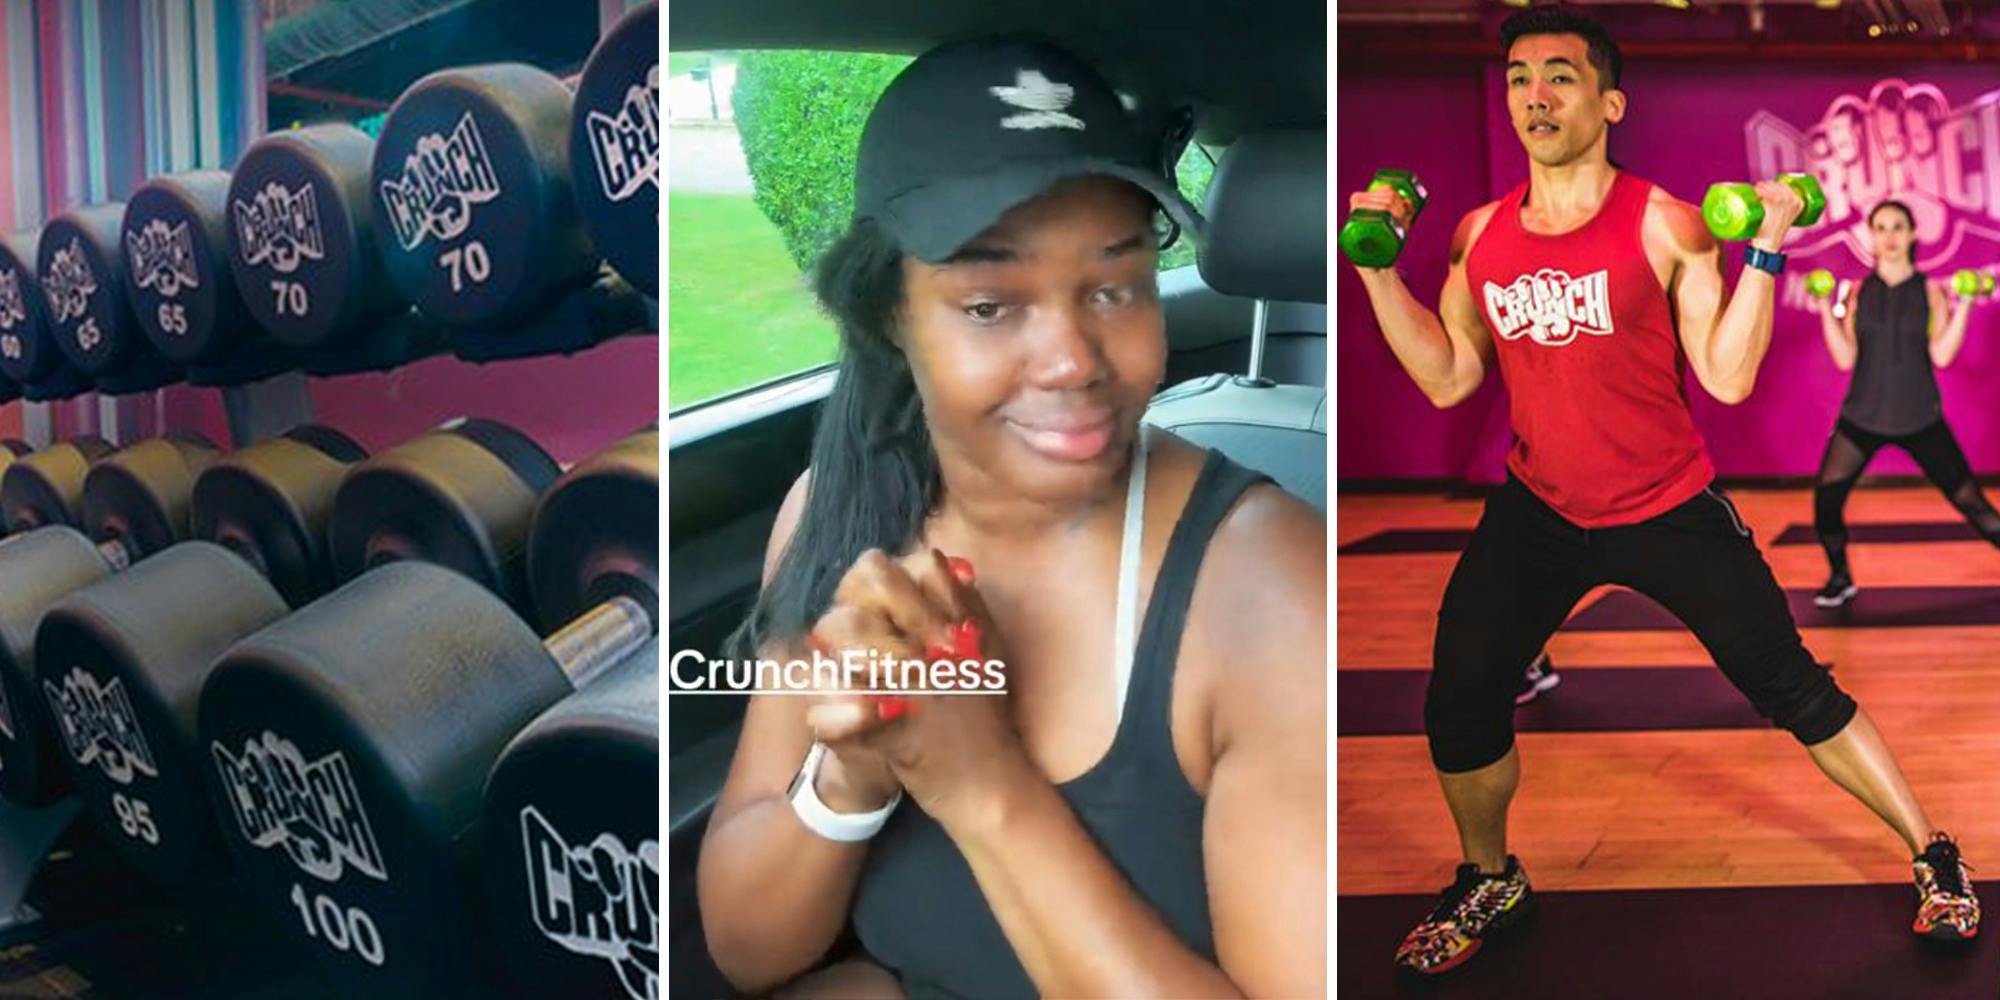 Customer warns against Crunch Fitness after ‘embarrassing’ interaction with ‘disgustingly rude’ trainer